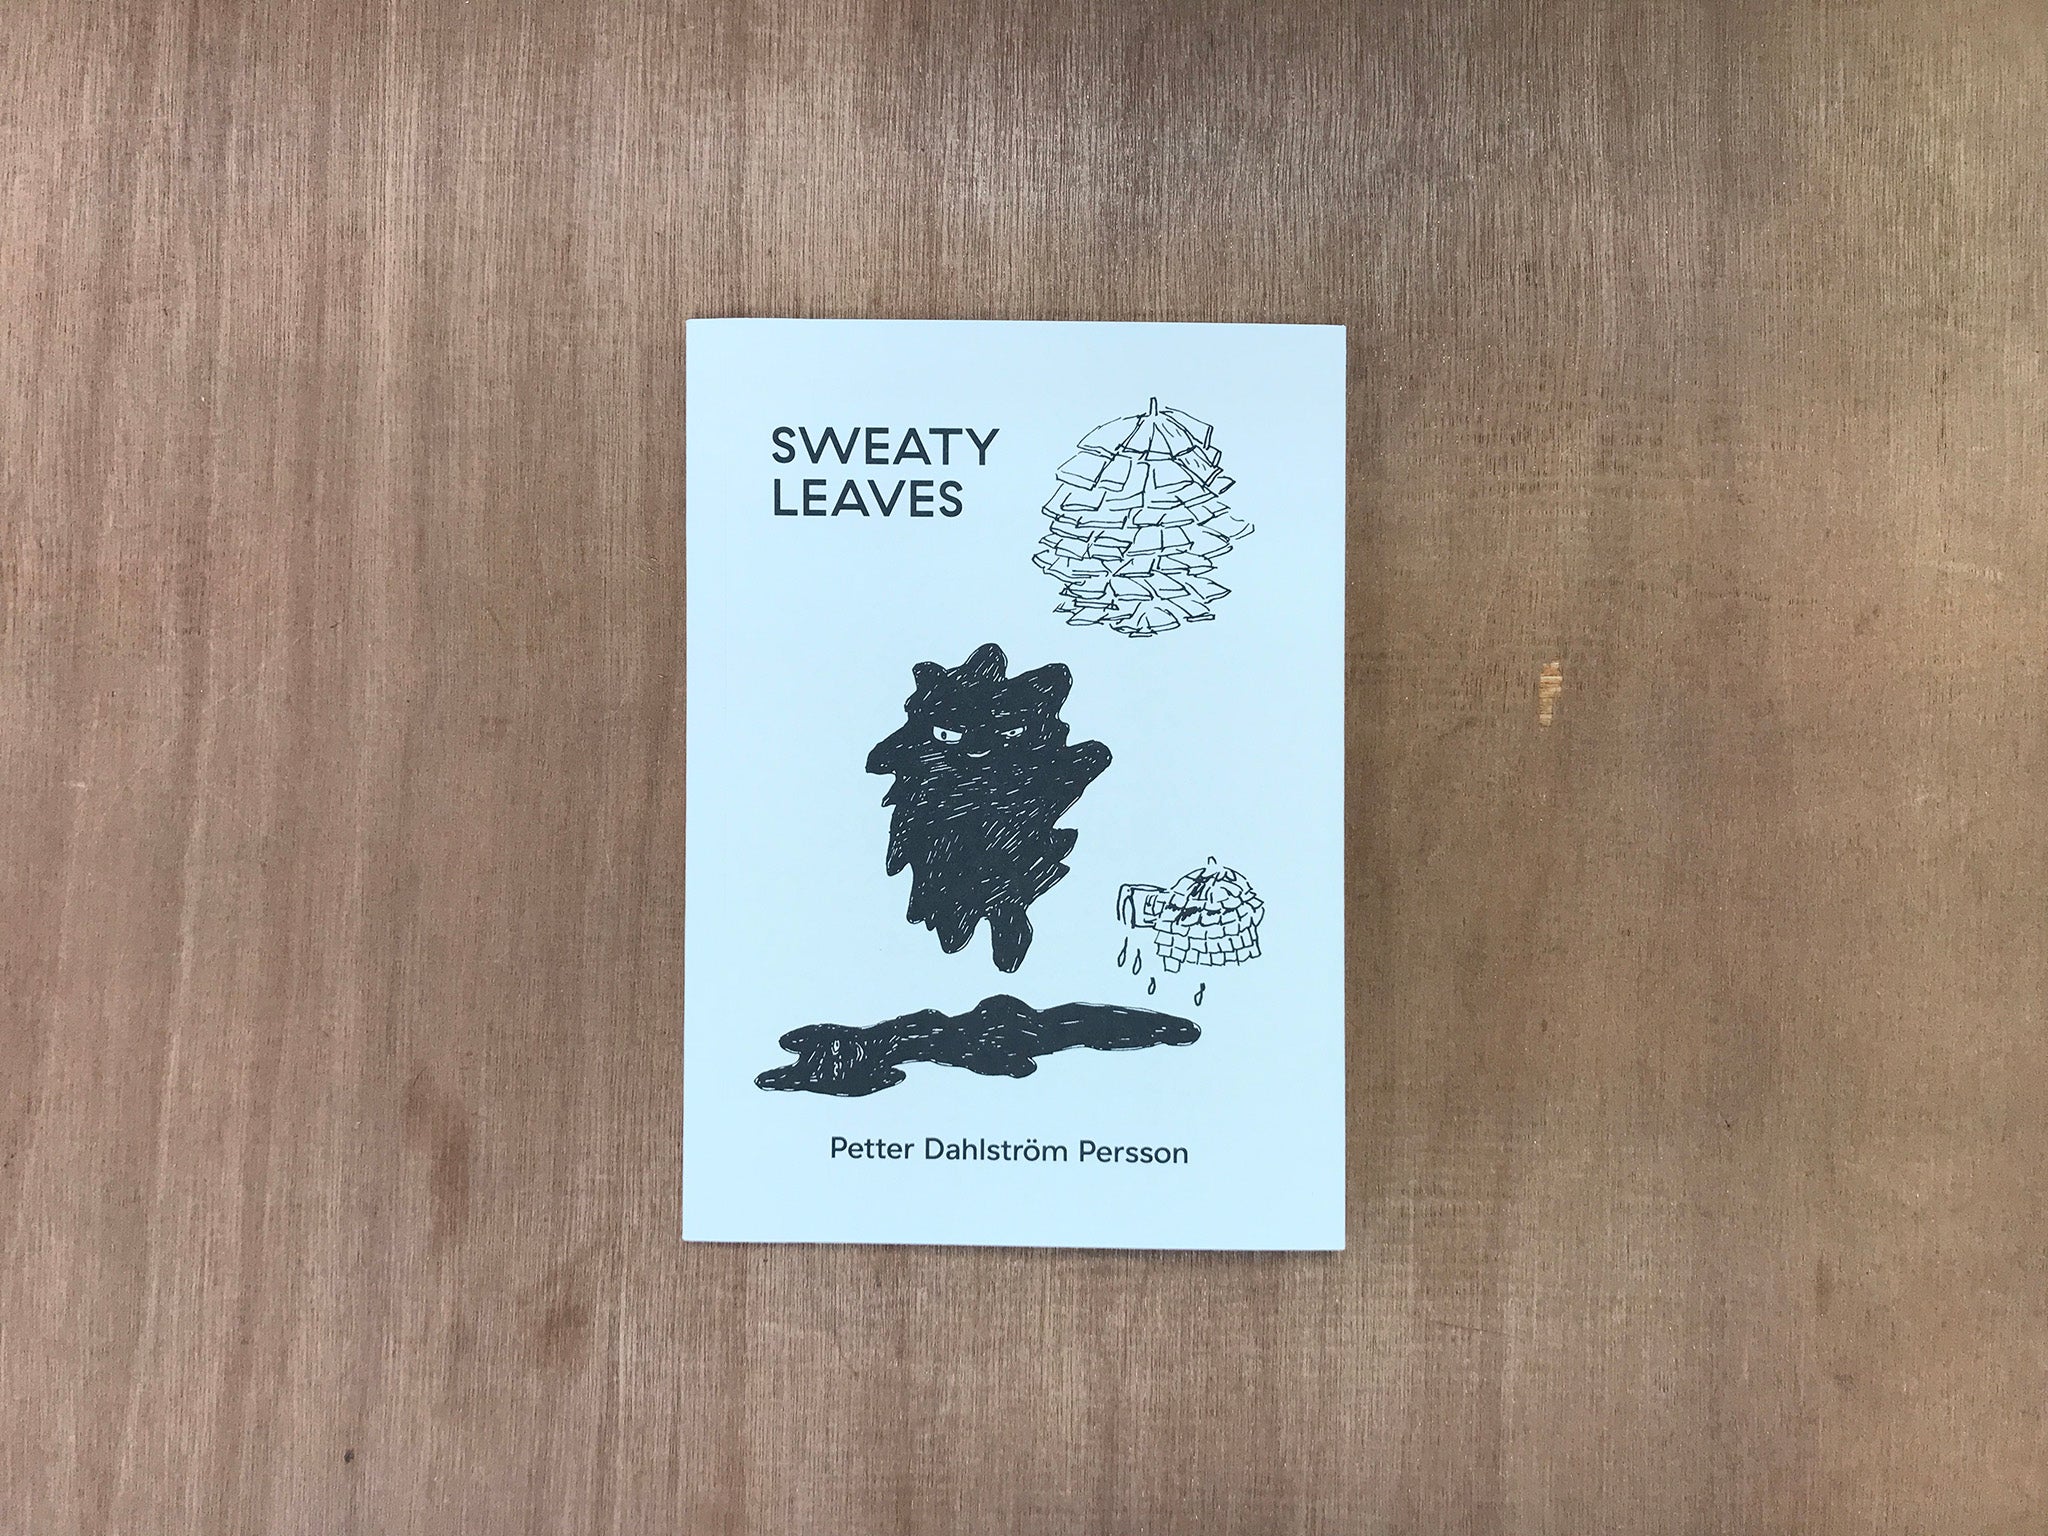 SWEATY LEAVES by Petter Dahlström Persson